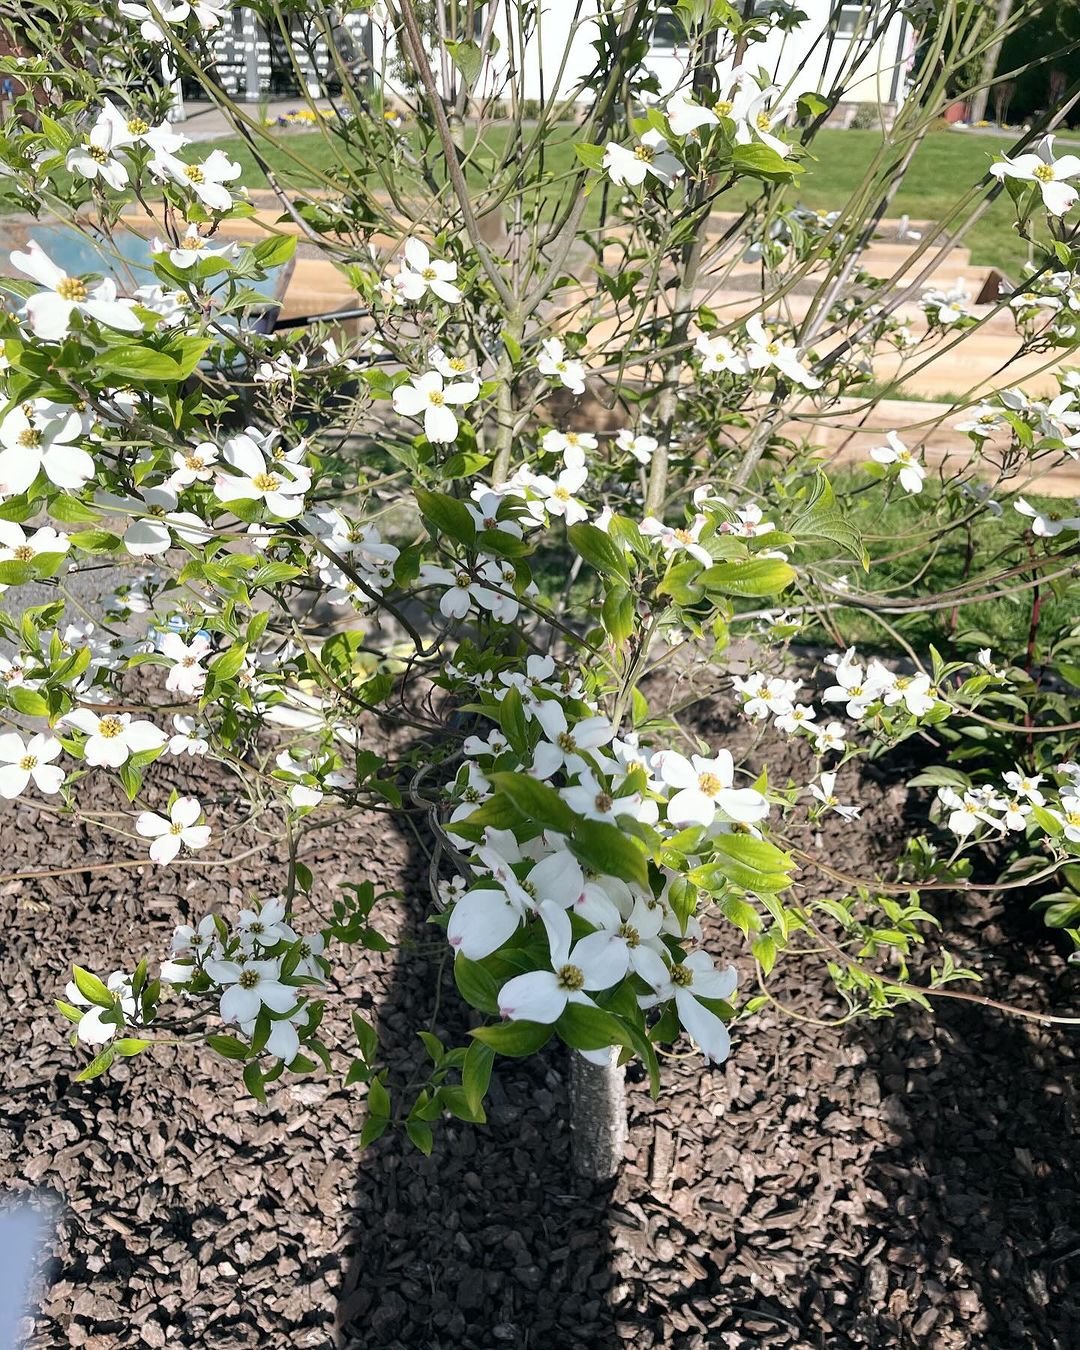 Dogwood tree featuring white flowers and heart-shaped leaves.